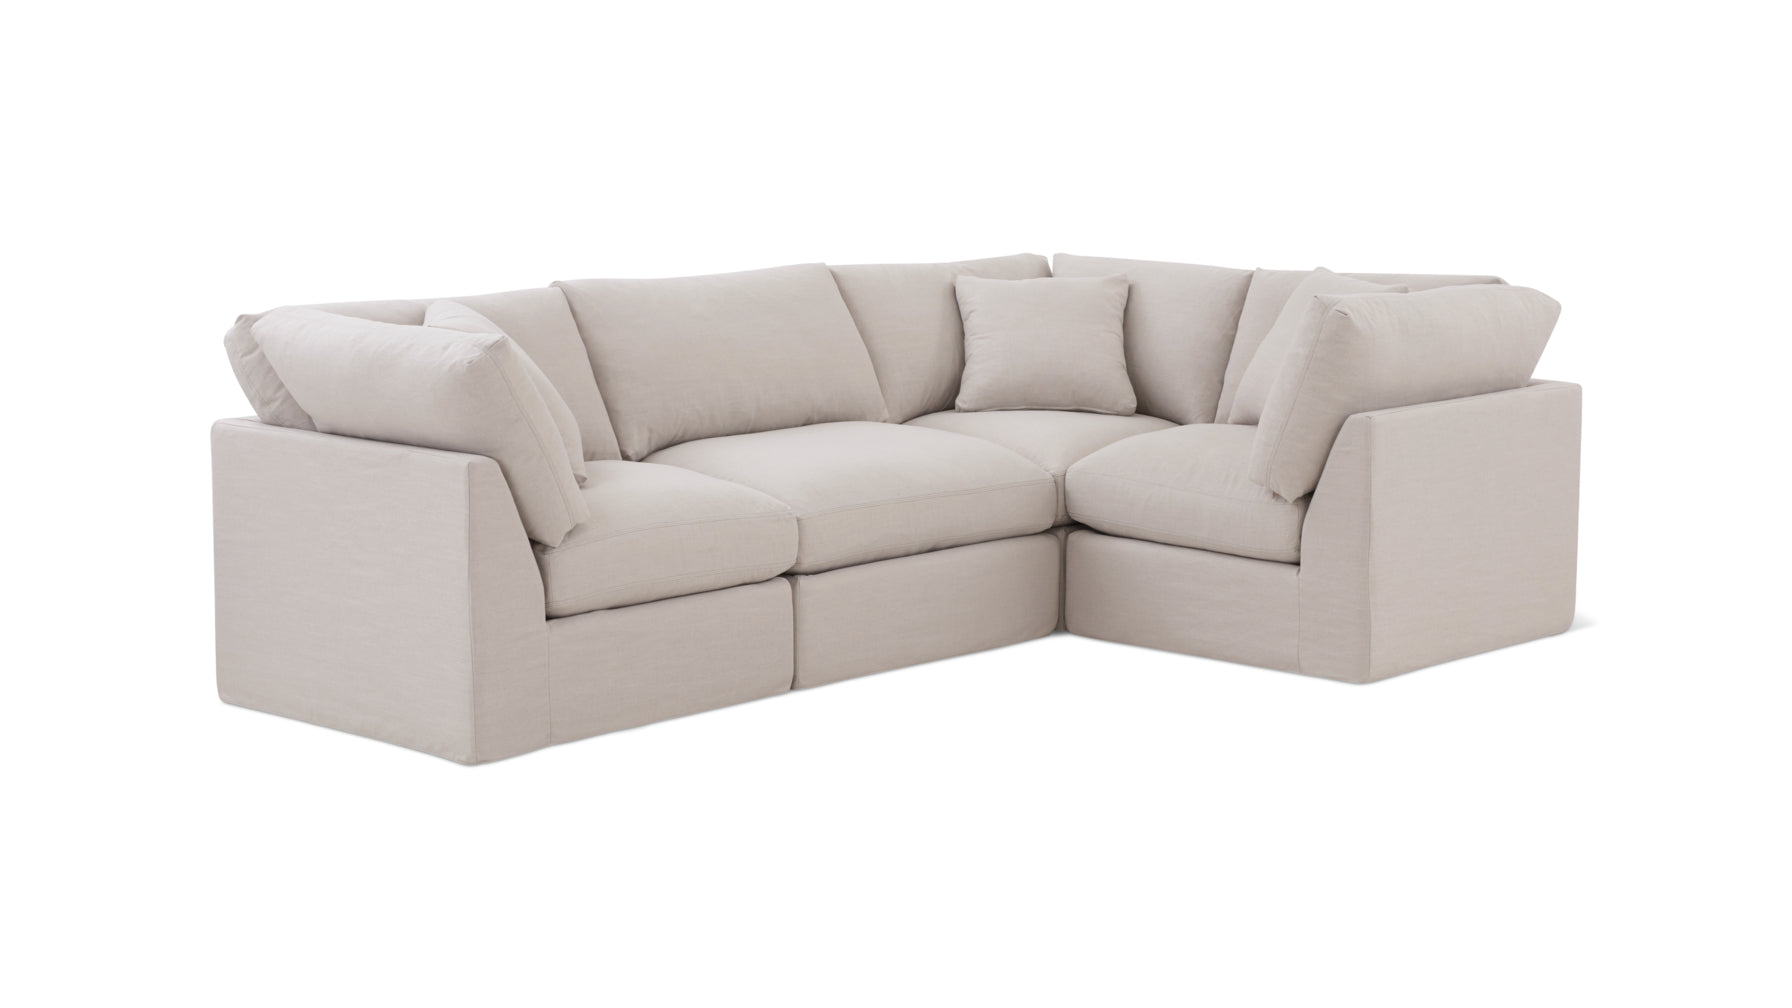 Get Together™ 4-Piece Modular Sectional Closed, Standard, Clay - Image 2